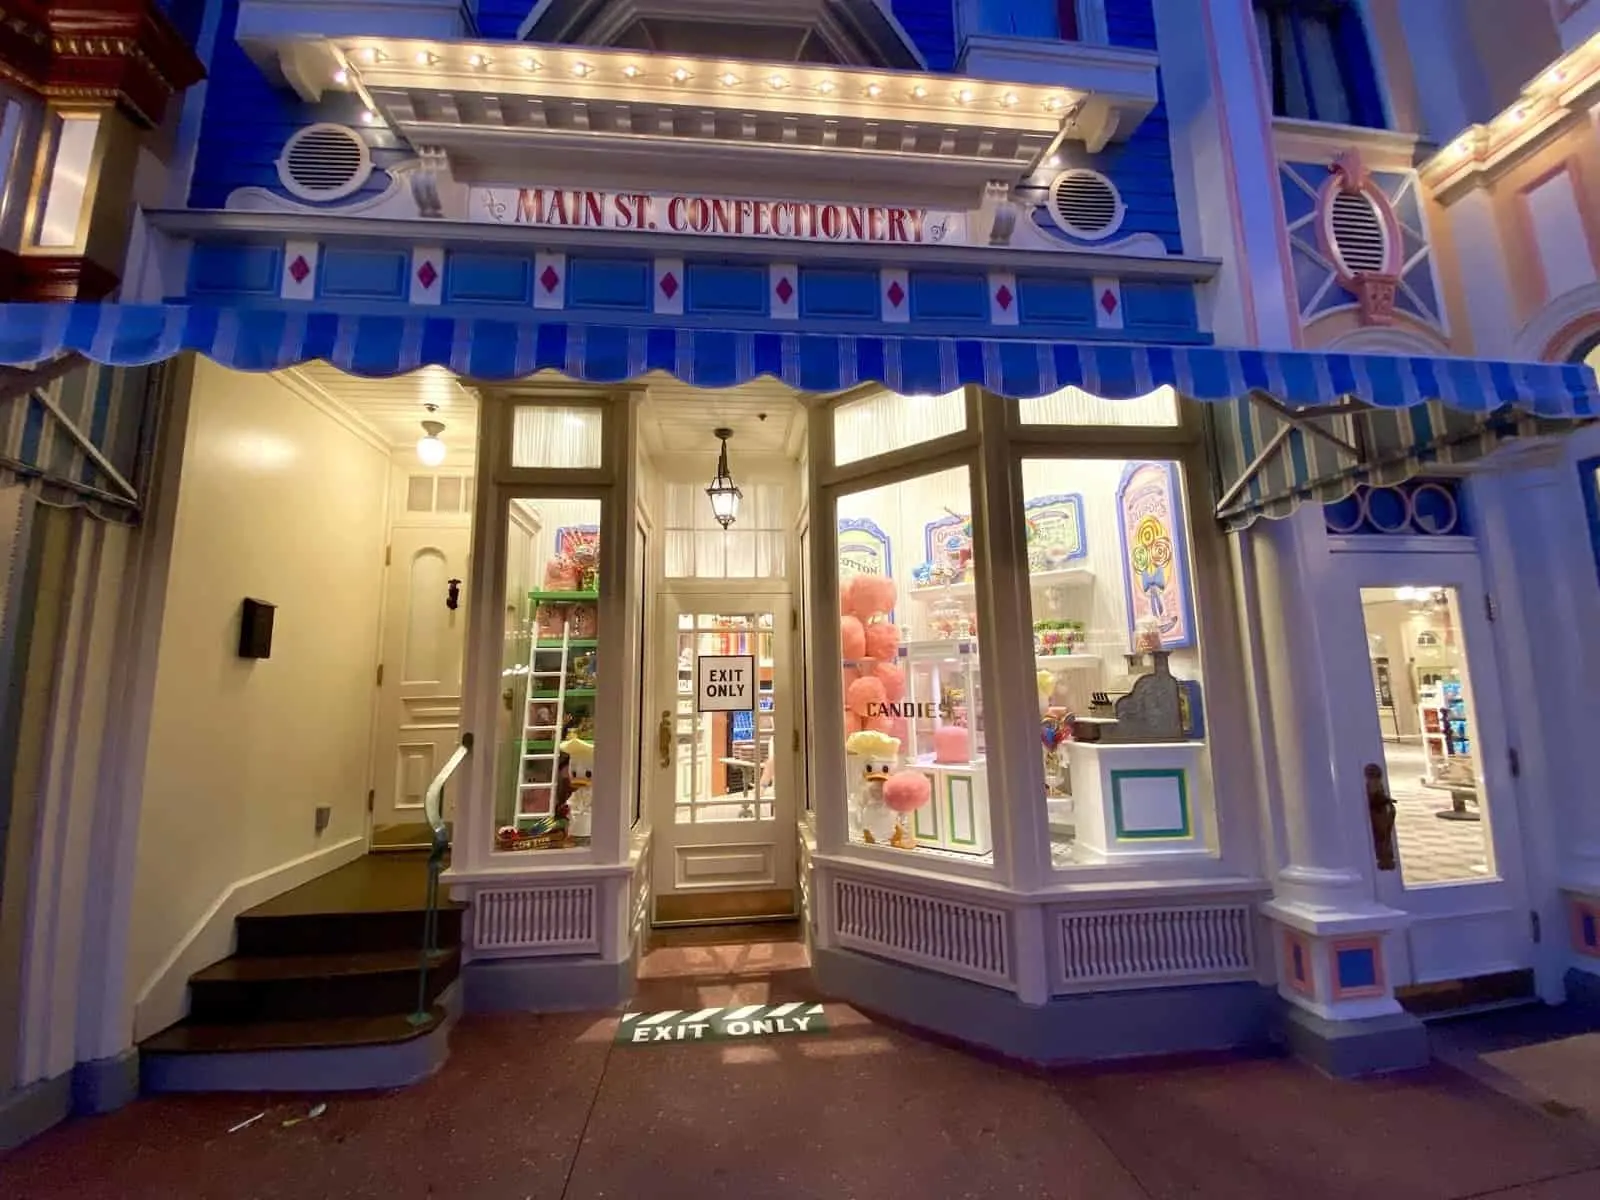 Disney World Adding Mobile Order To Main Street Confectionery & More